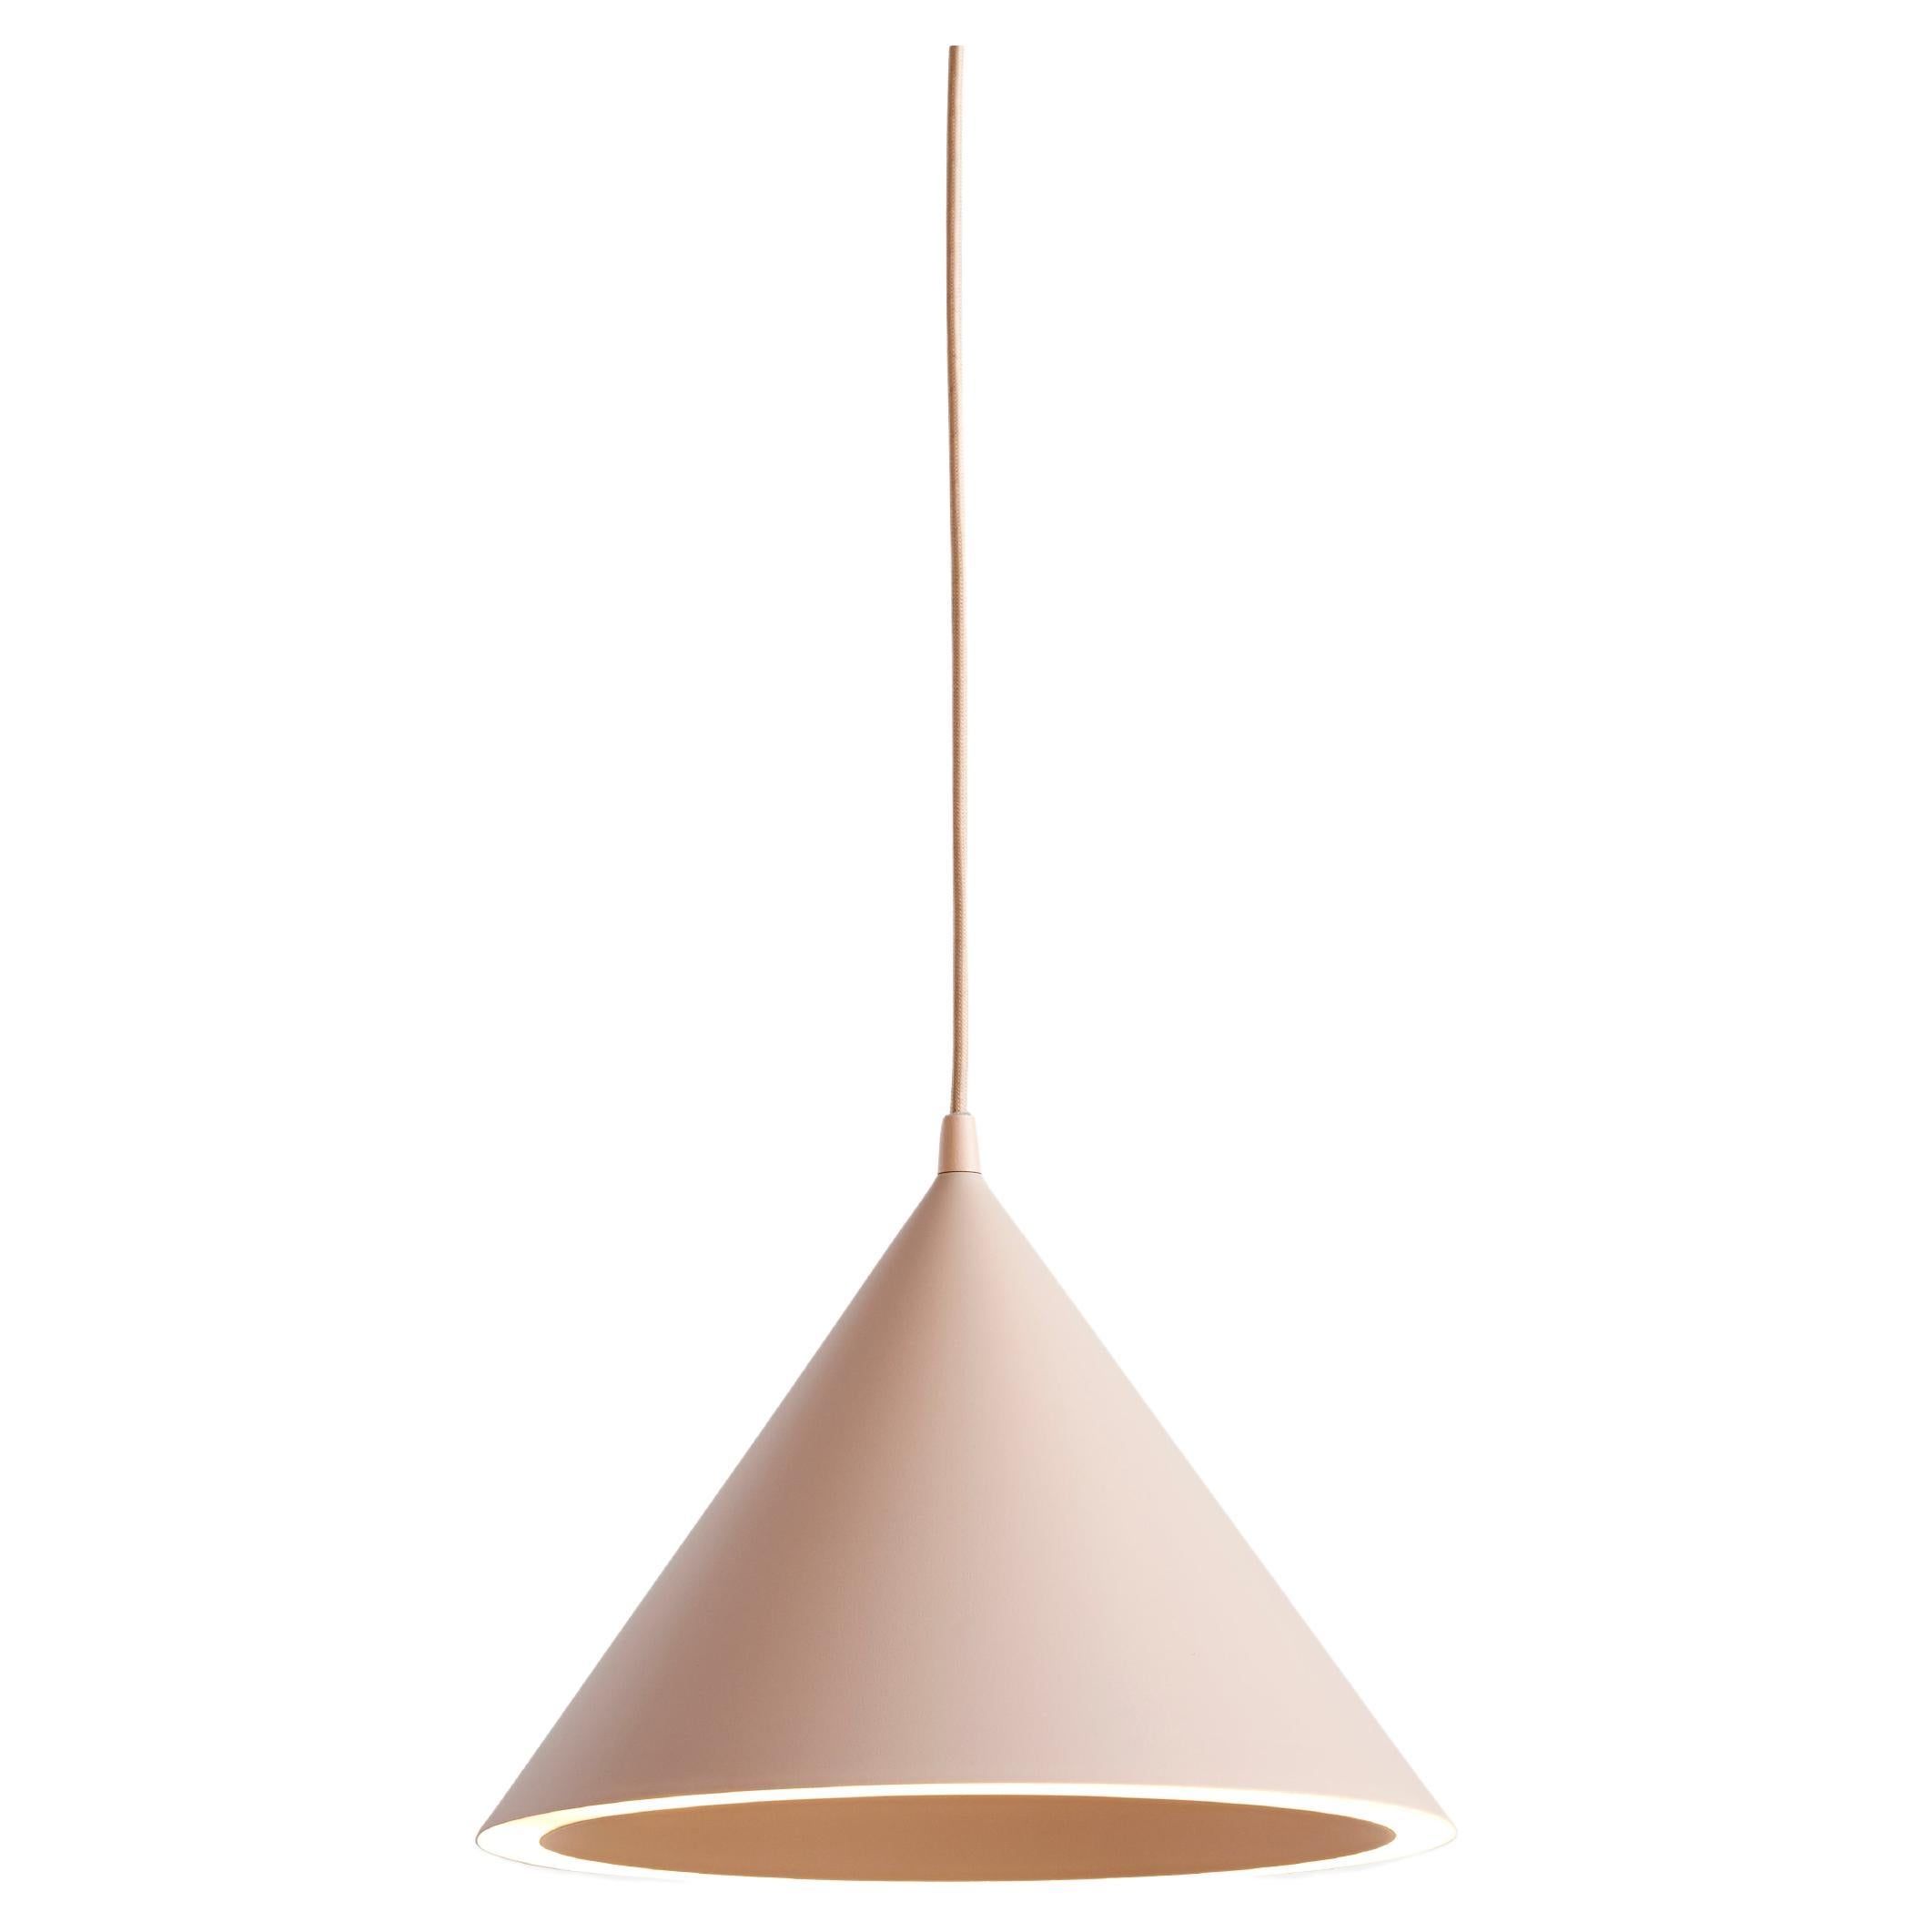 Small Nude Annular Pendant Lamp by MSDS Studio